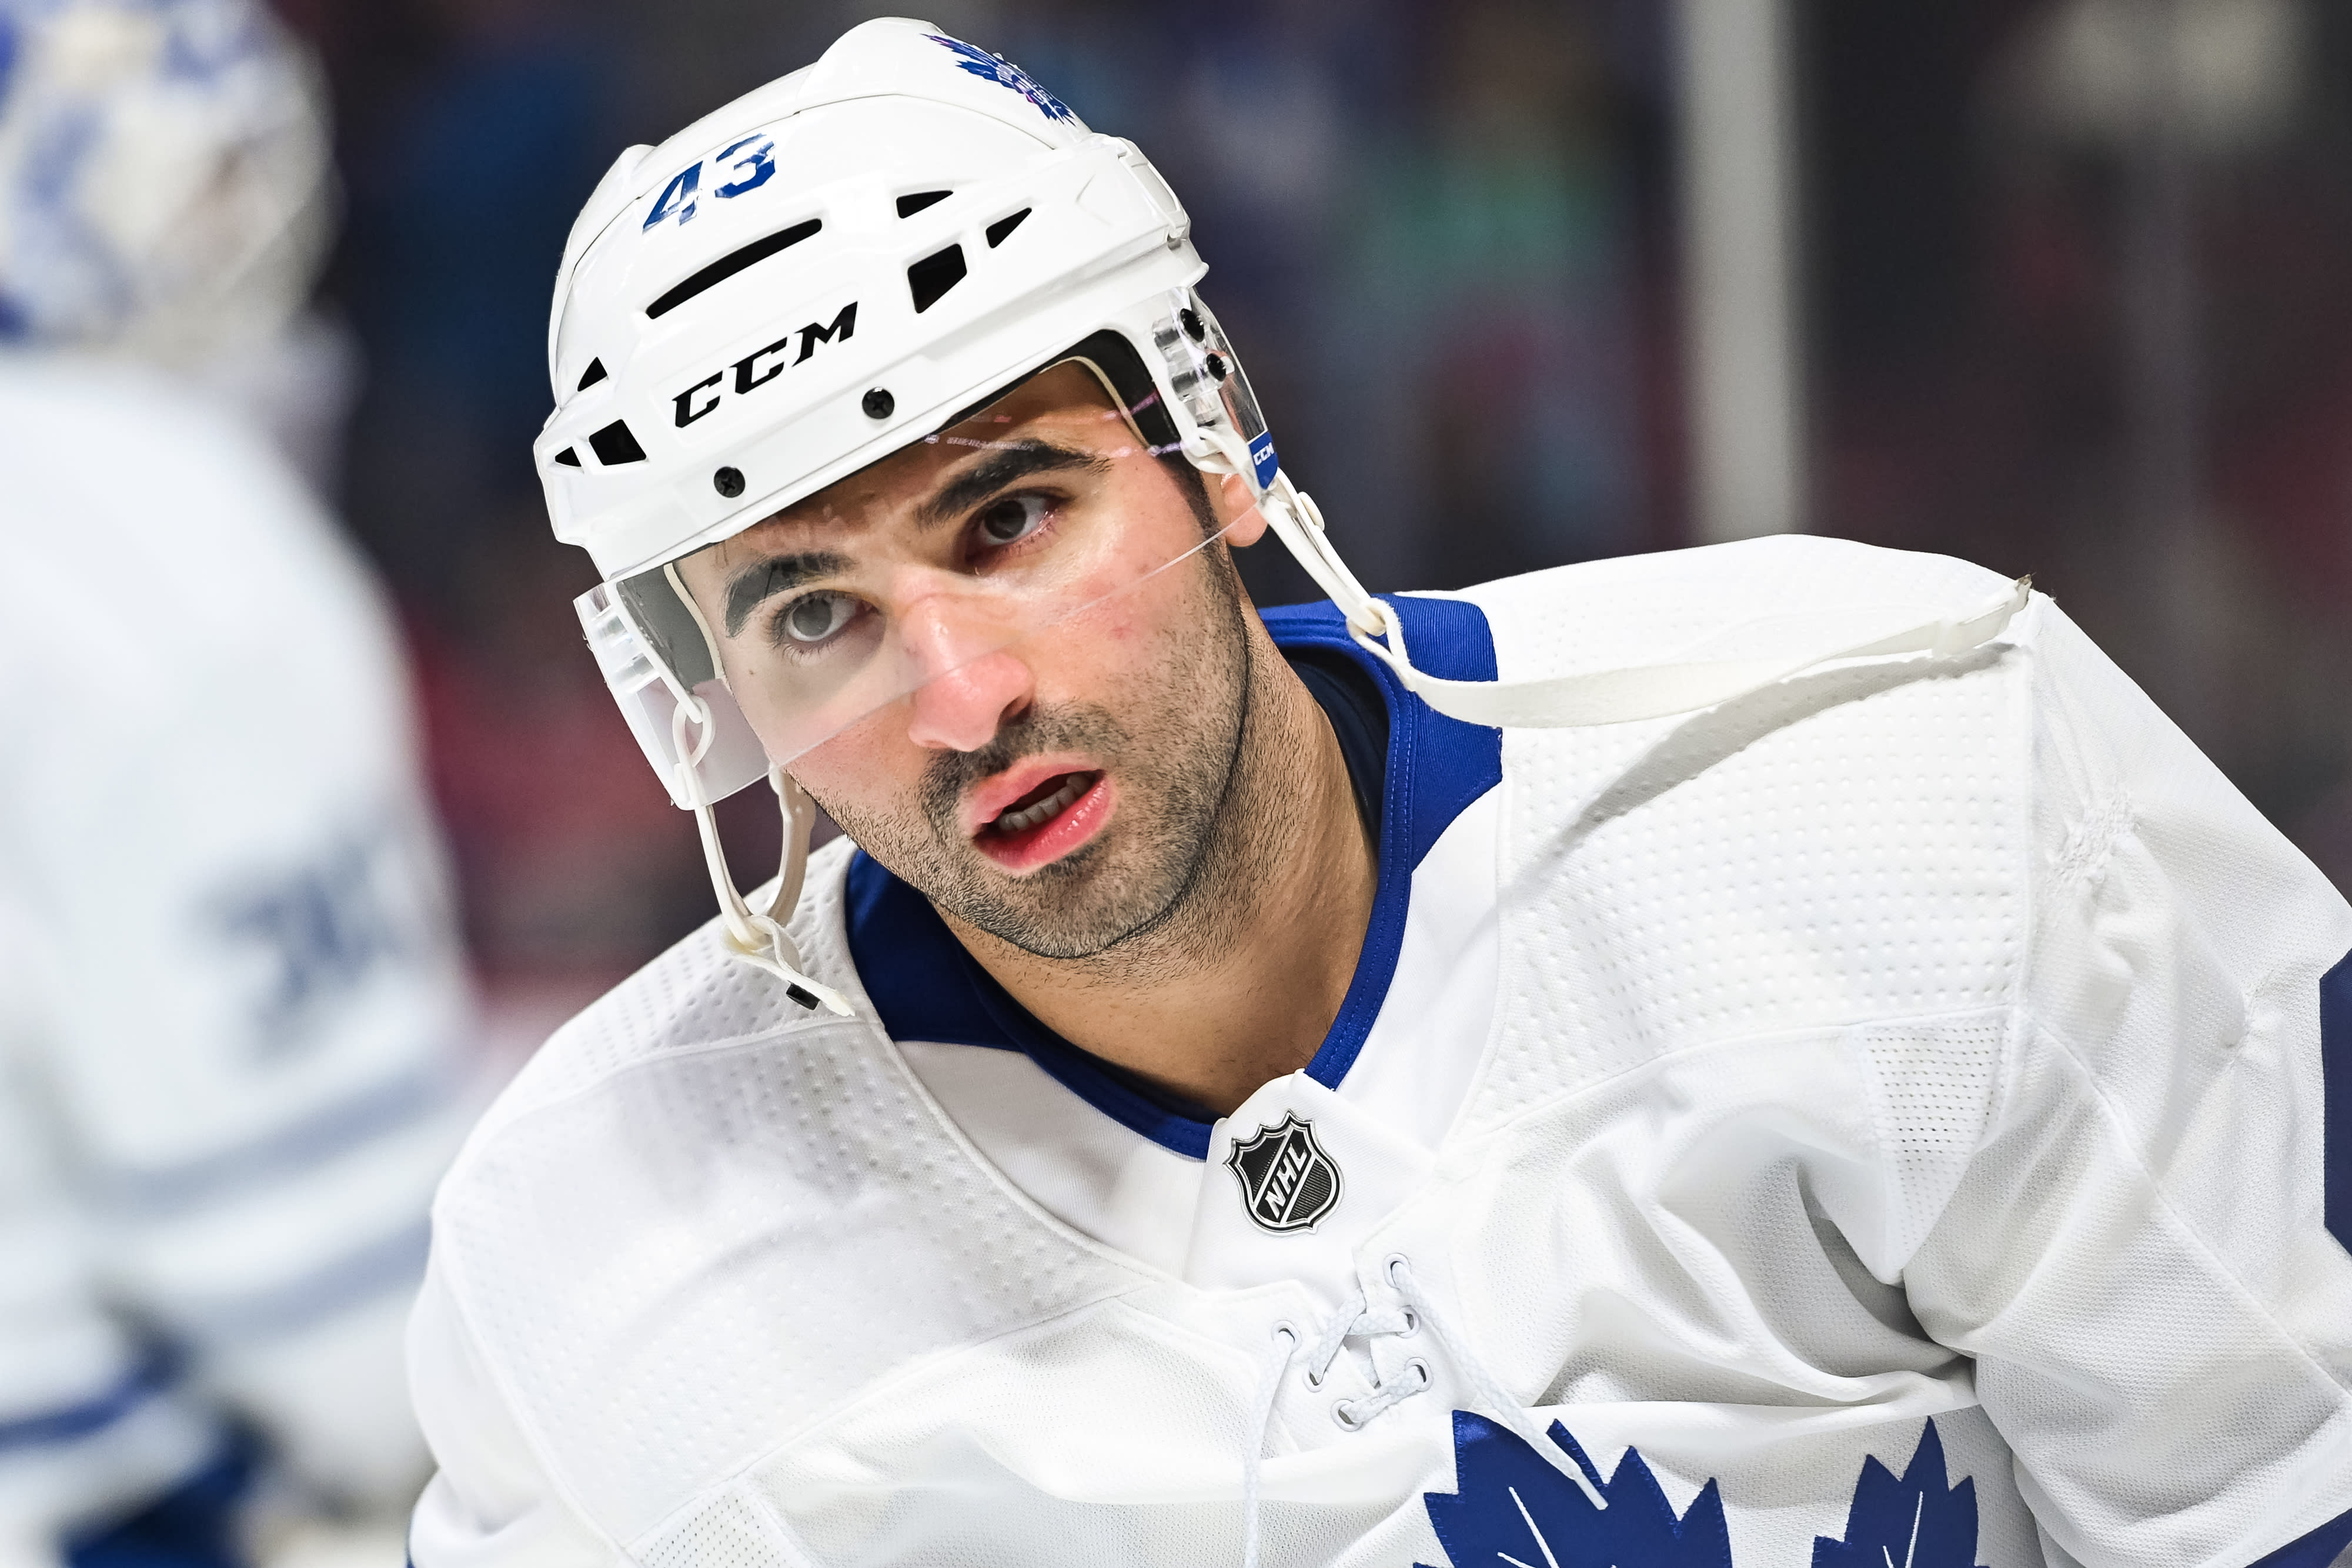 For young Muslim hockey players, Nazem Kadri is changing the game